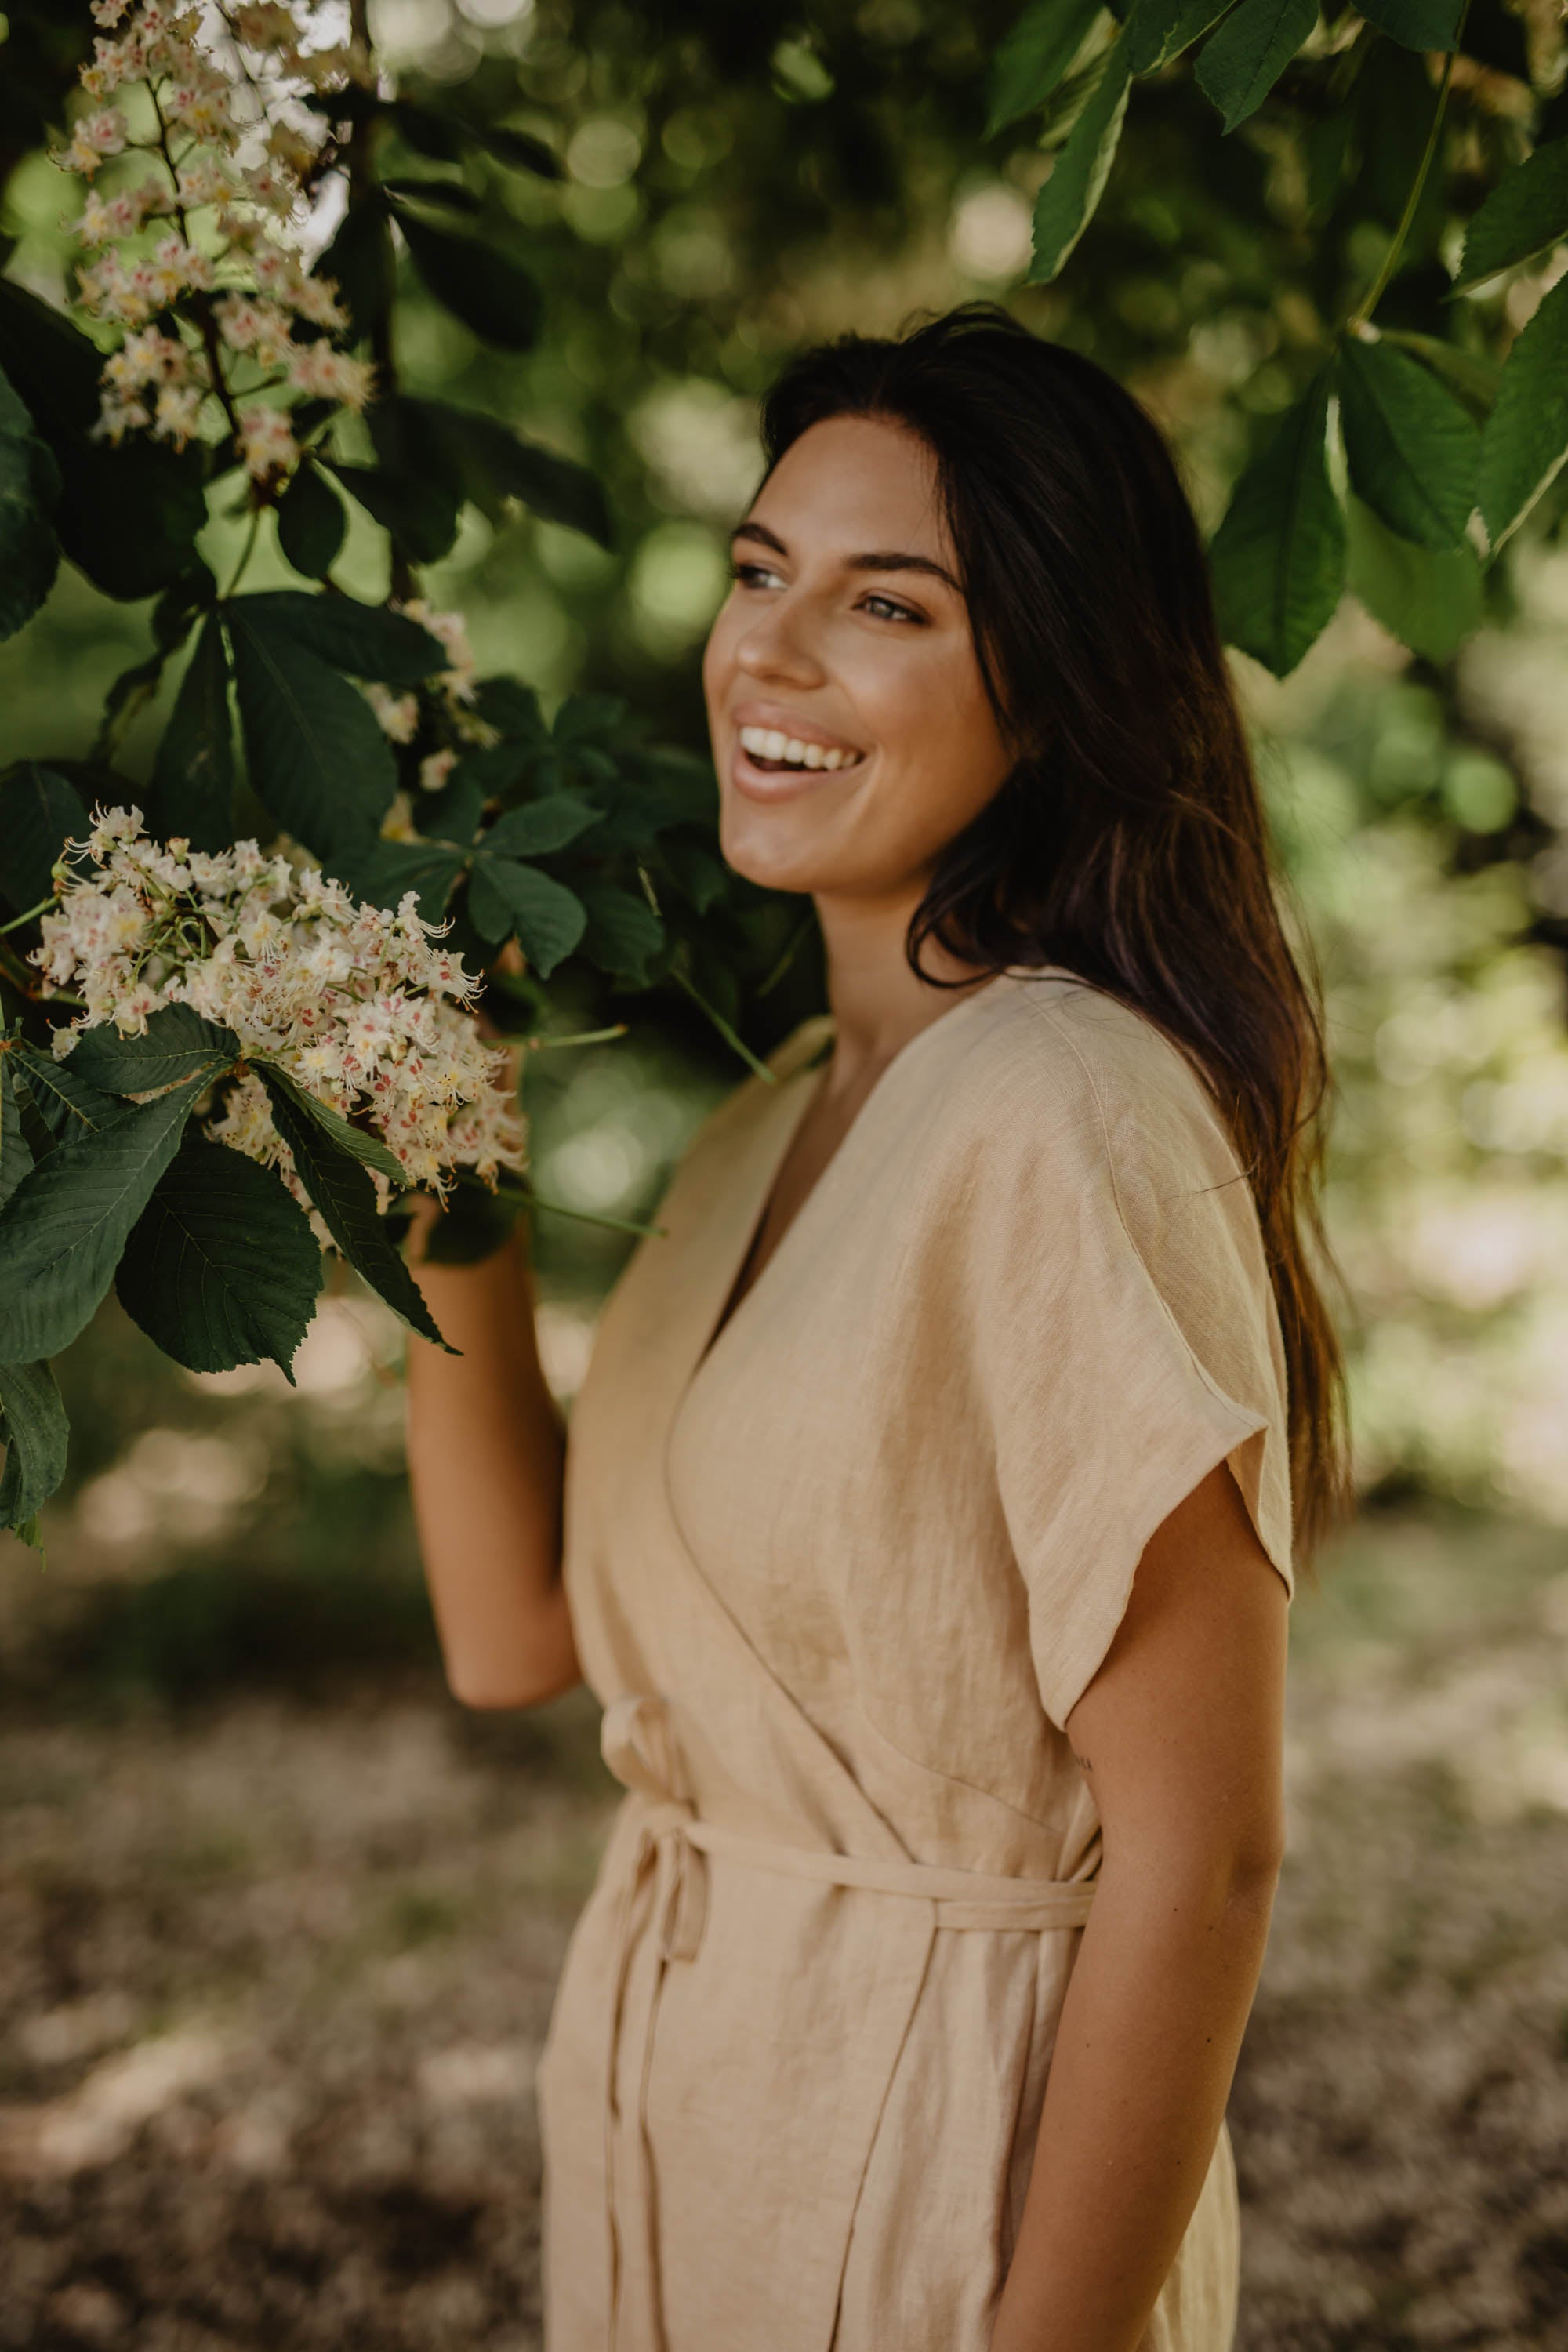 Close Up Of Women In Mustard Linen Dress Next To A Blossoming Tree